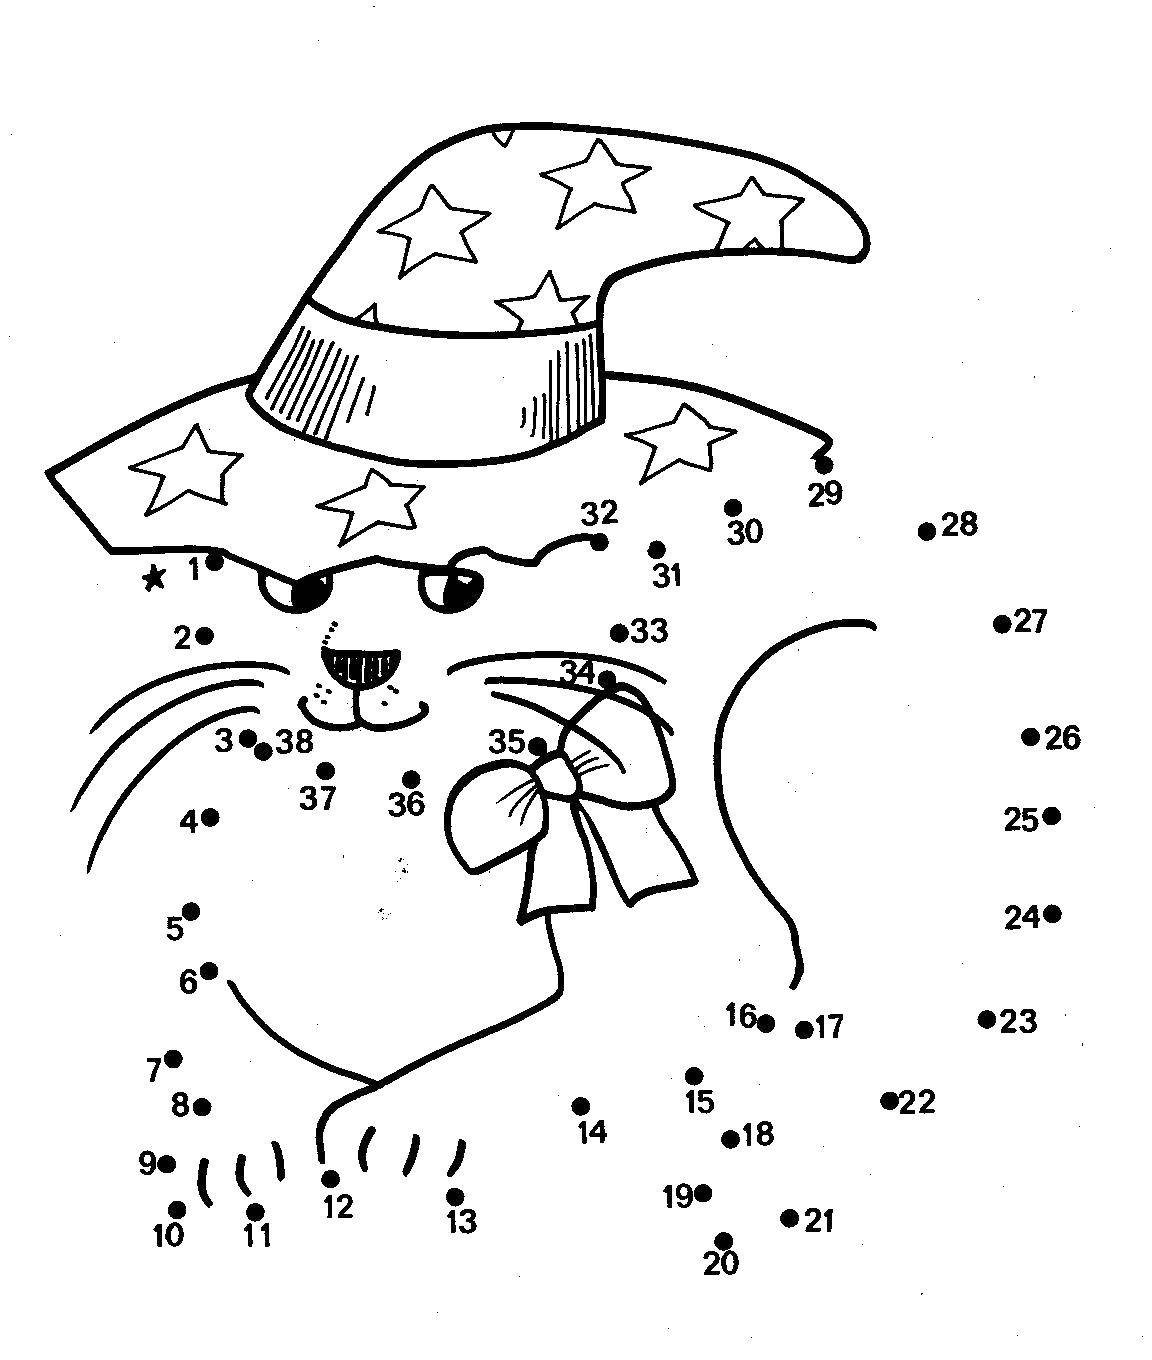 Coloring Cat numbers. Category coloring by numbers. Tags:  the cat rooms.